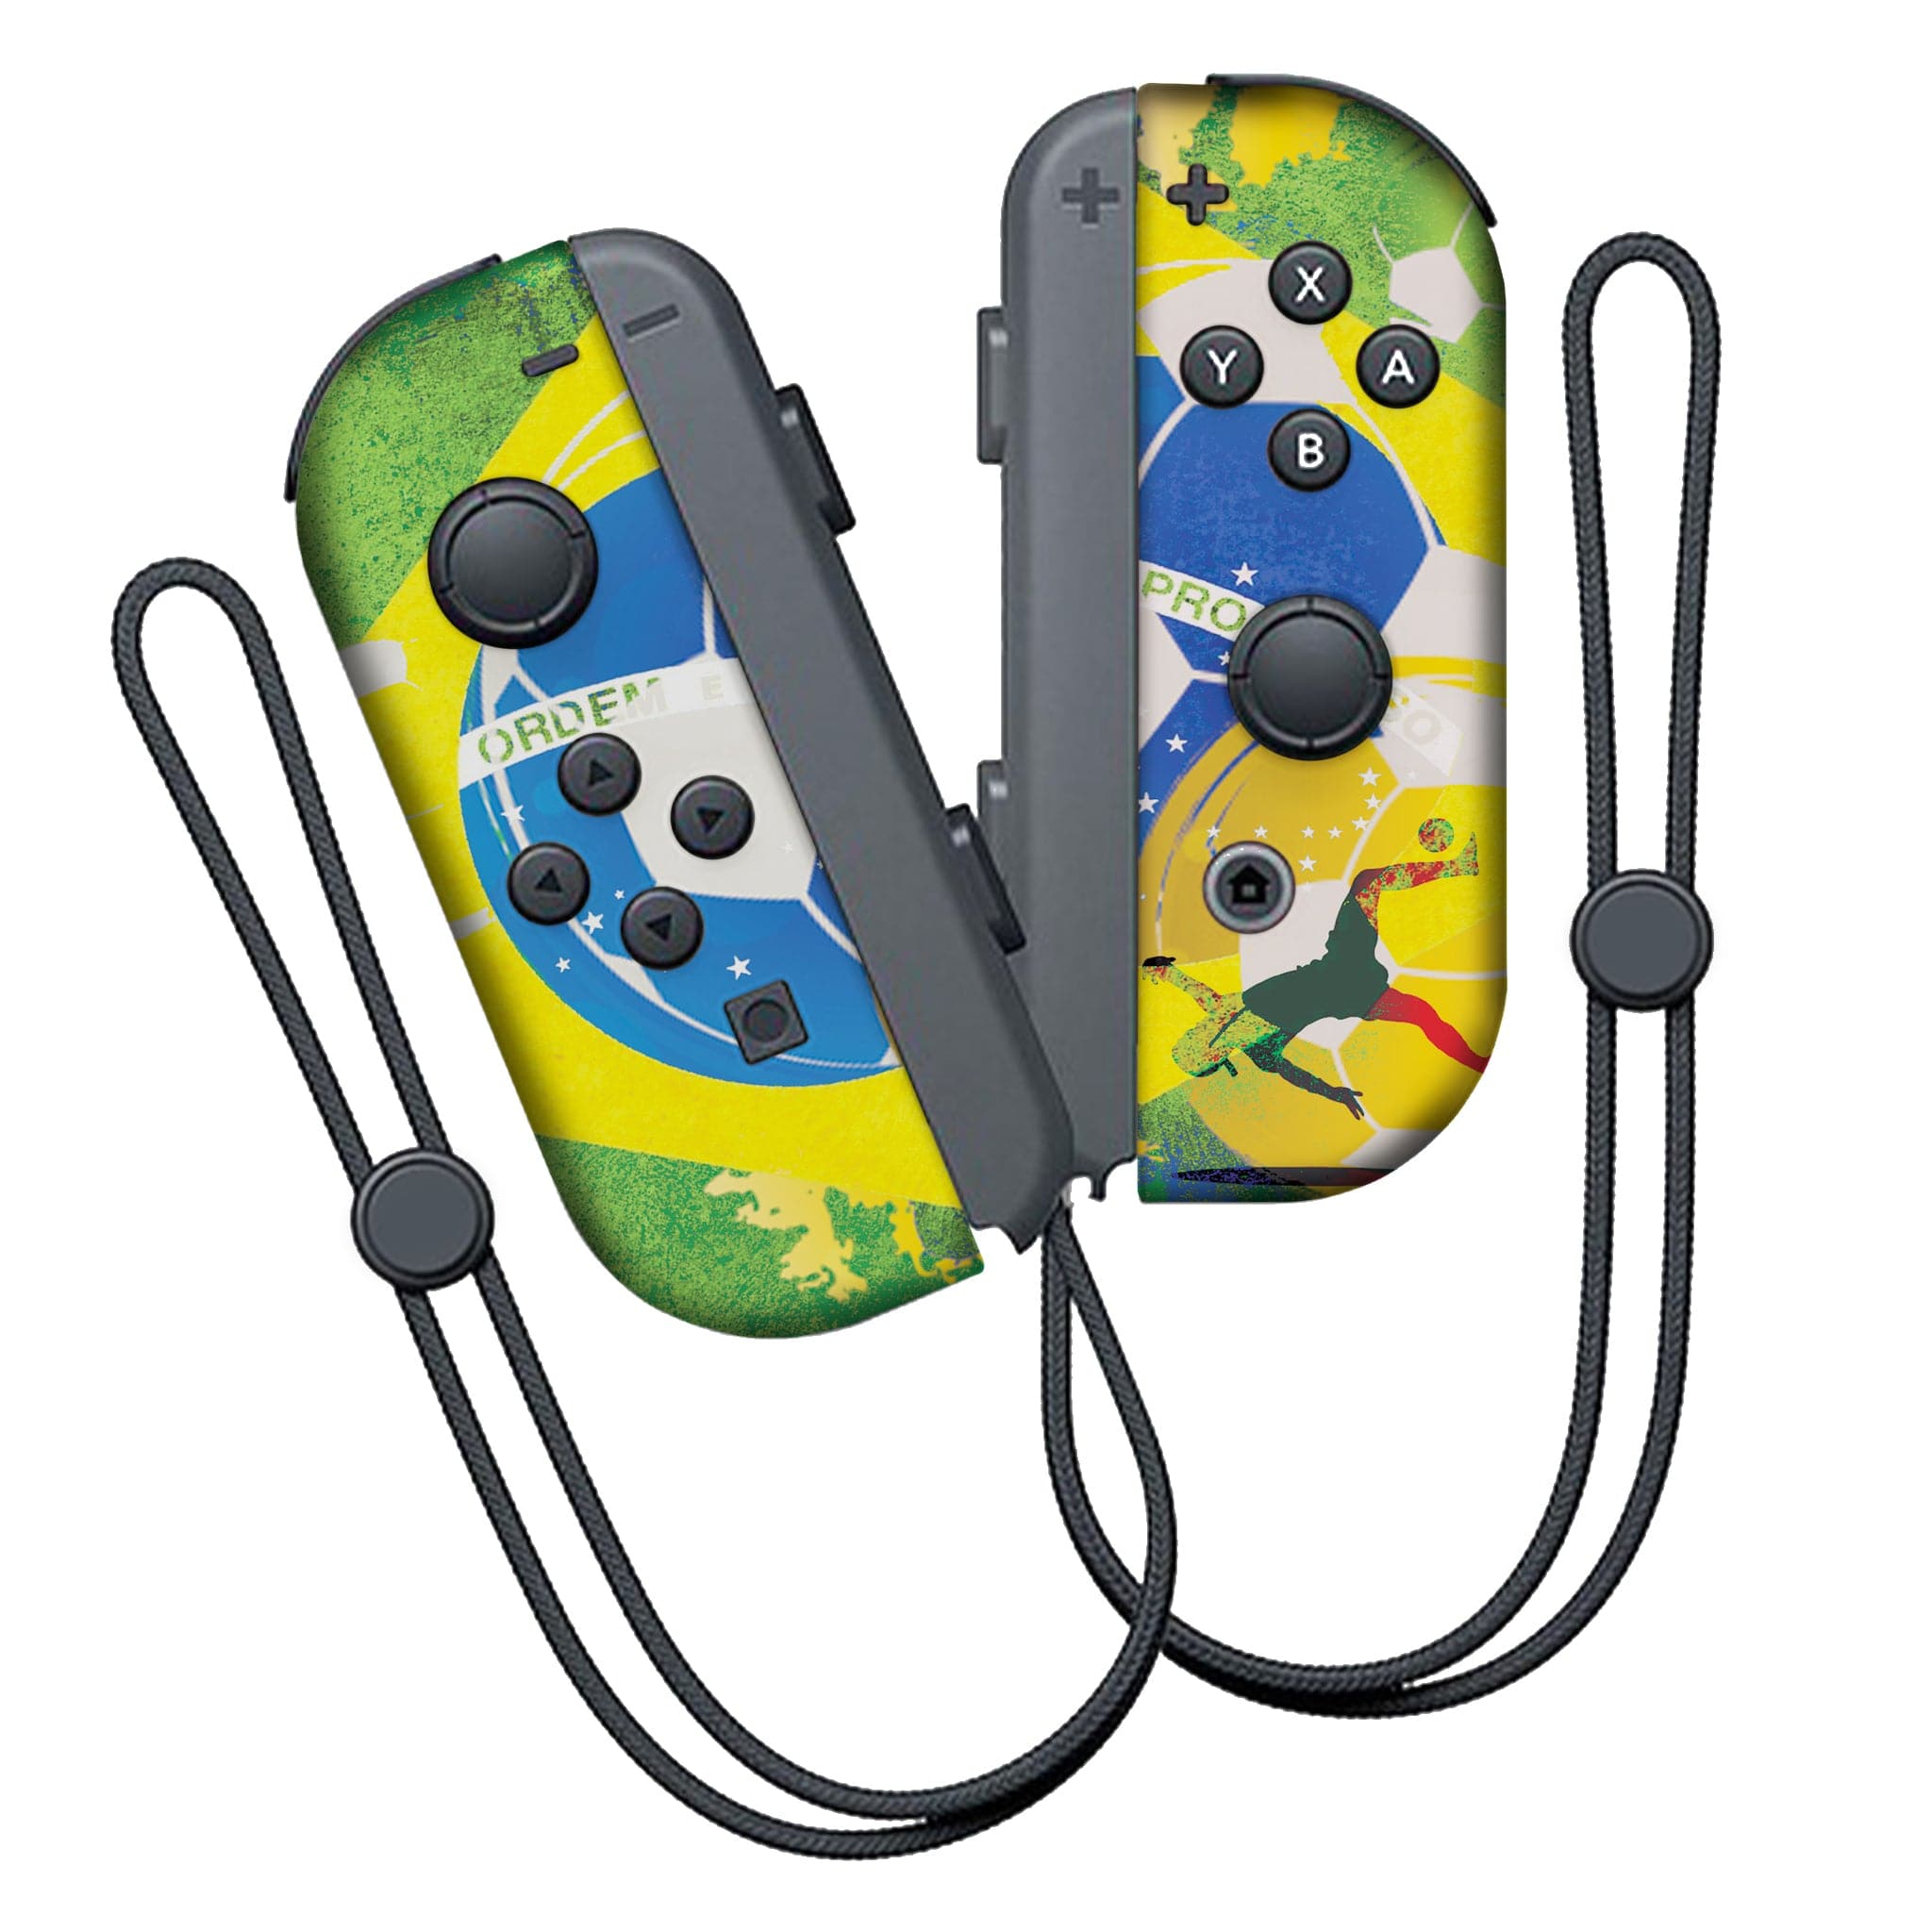 Brazil Inspired Nintendo Switch Joy-Con Left and Right Switch Controllers by Nintendo